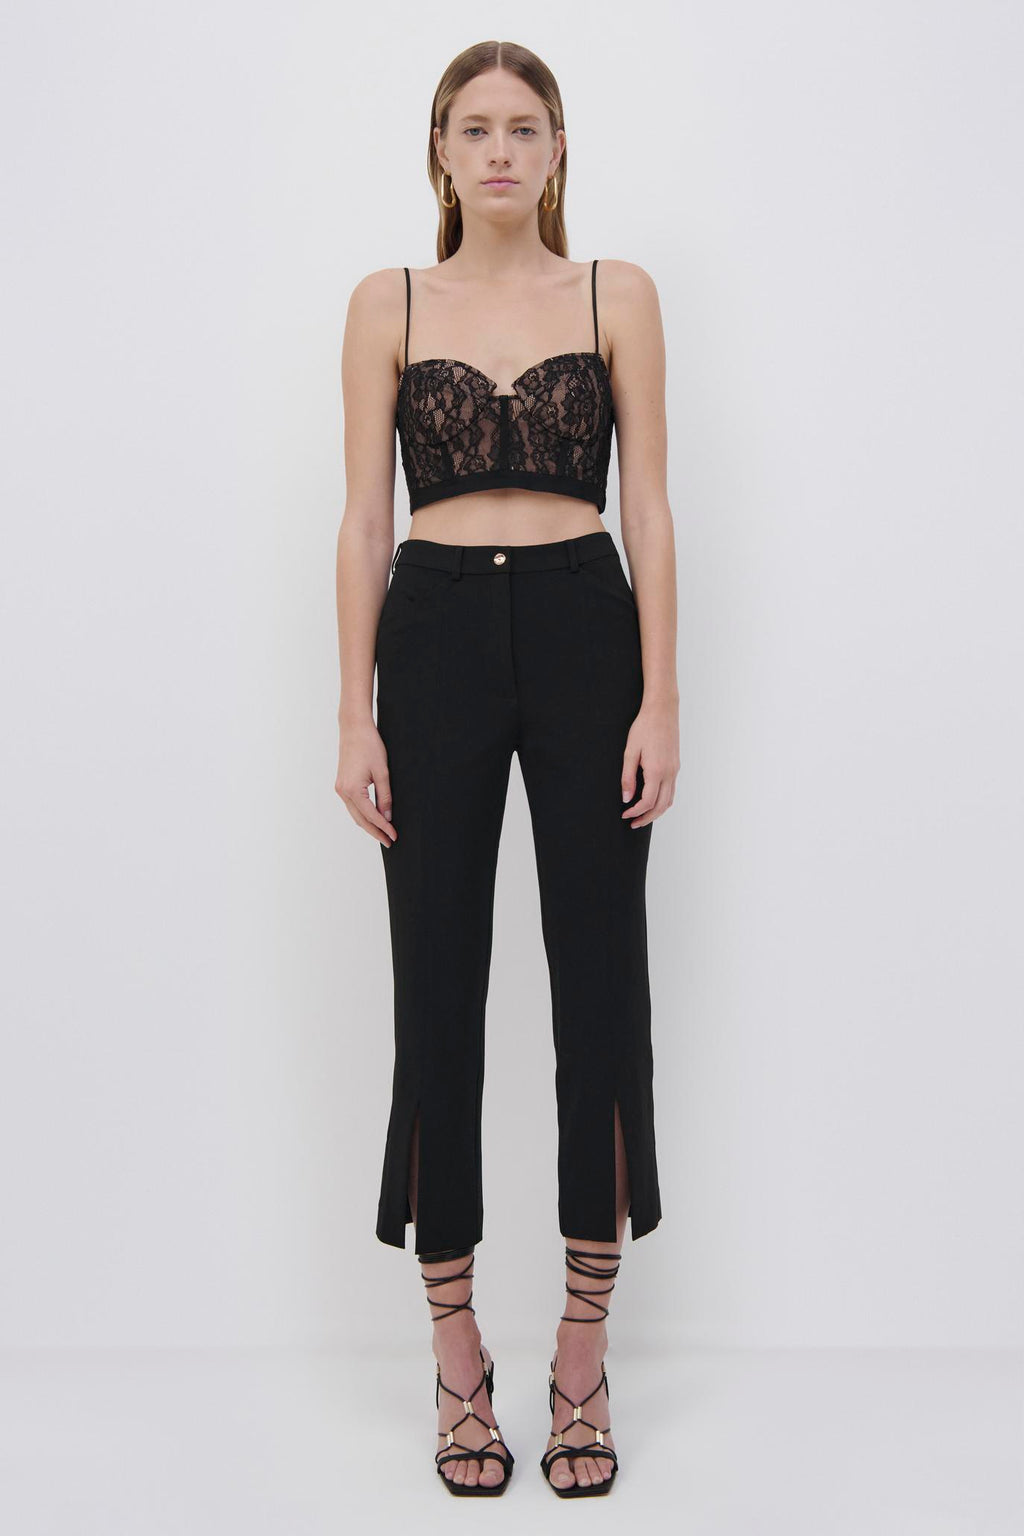 Shirley Delicate Lace Bustier Top